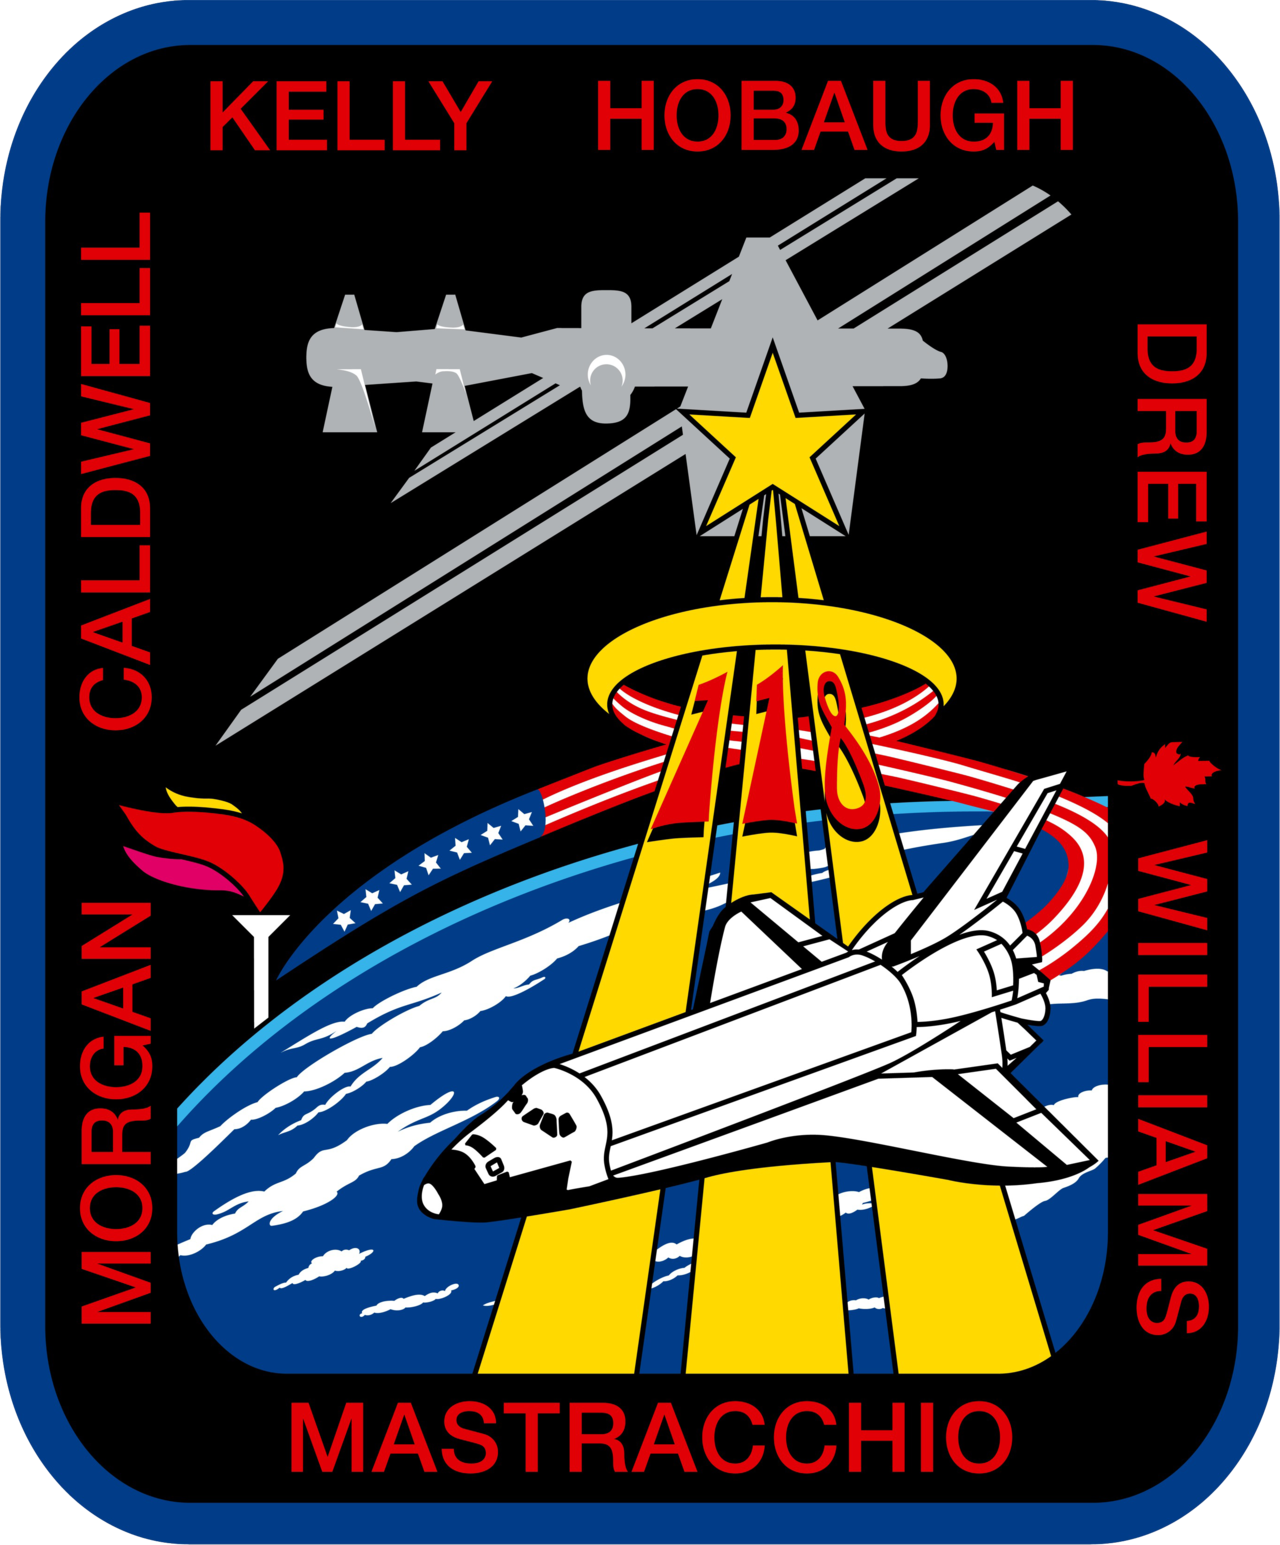 Mission patch for STS-118